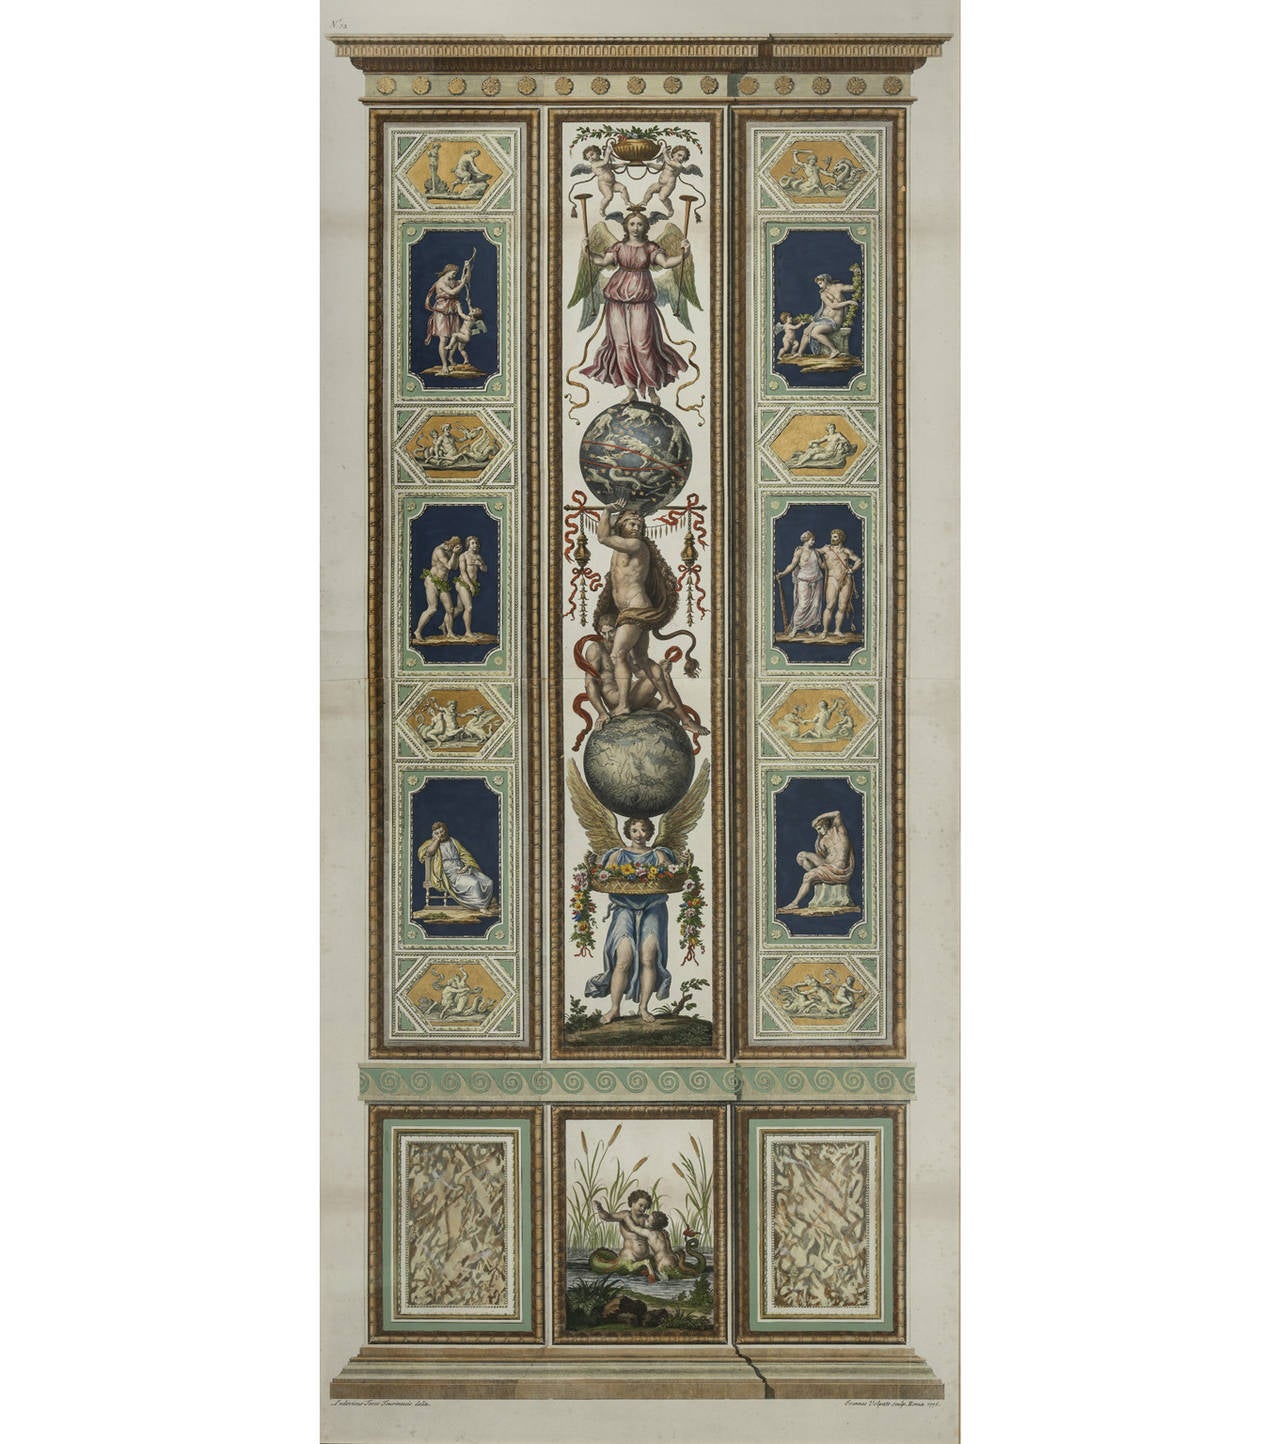 Central decoration contains scenes of gods and goddesses holding spheres of night sky and earth; lower panel contains a scene of two sea god children.

From Loggia di Rafaele nel Vaticano, by Raphael Sanzio D'Urbino, engraved by Giovanni Volpato,